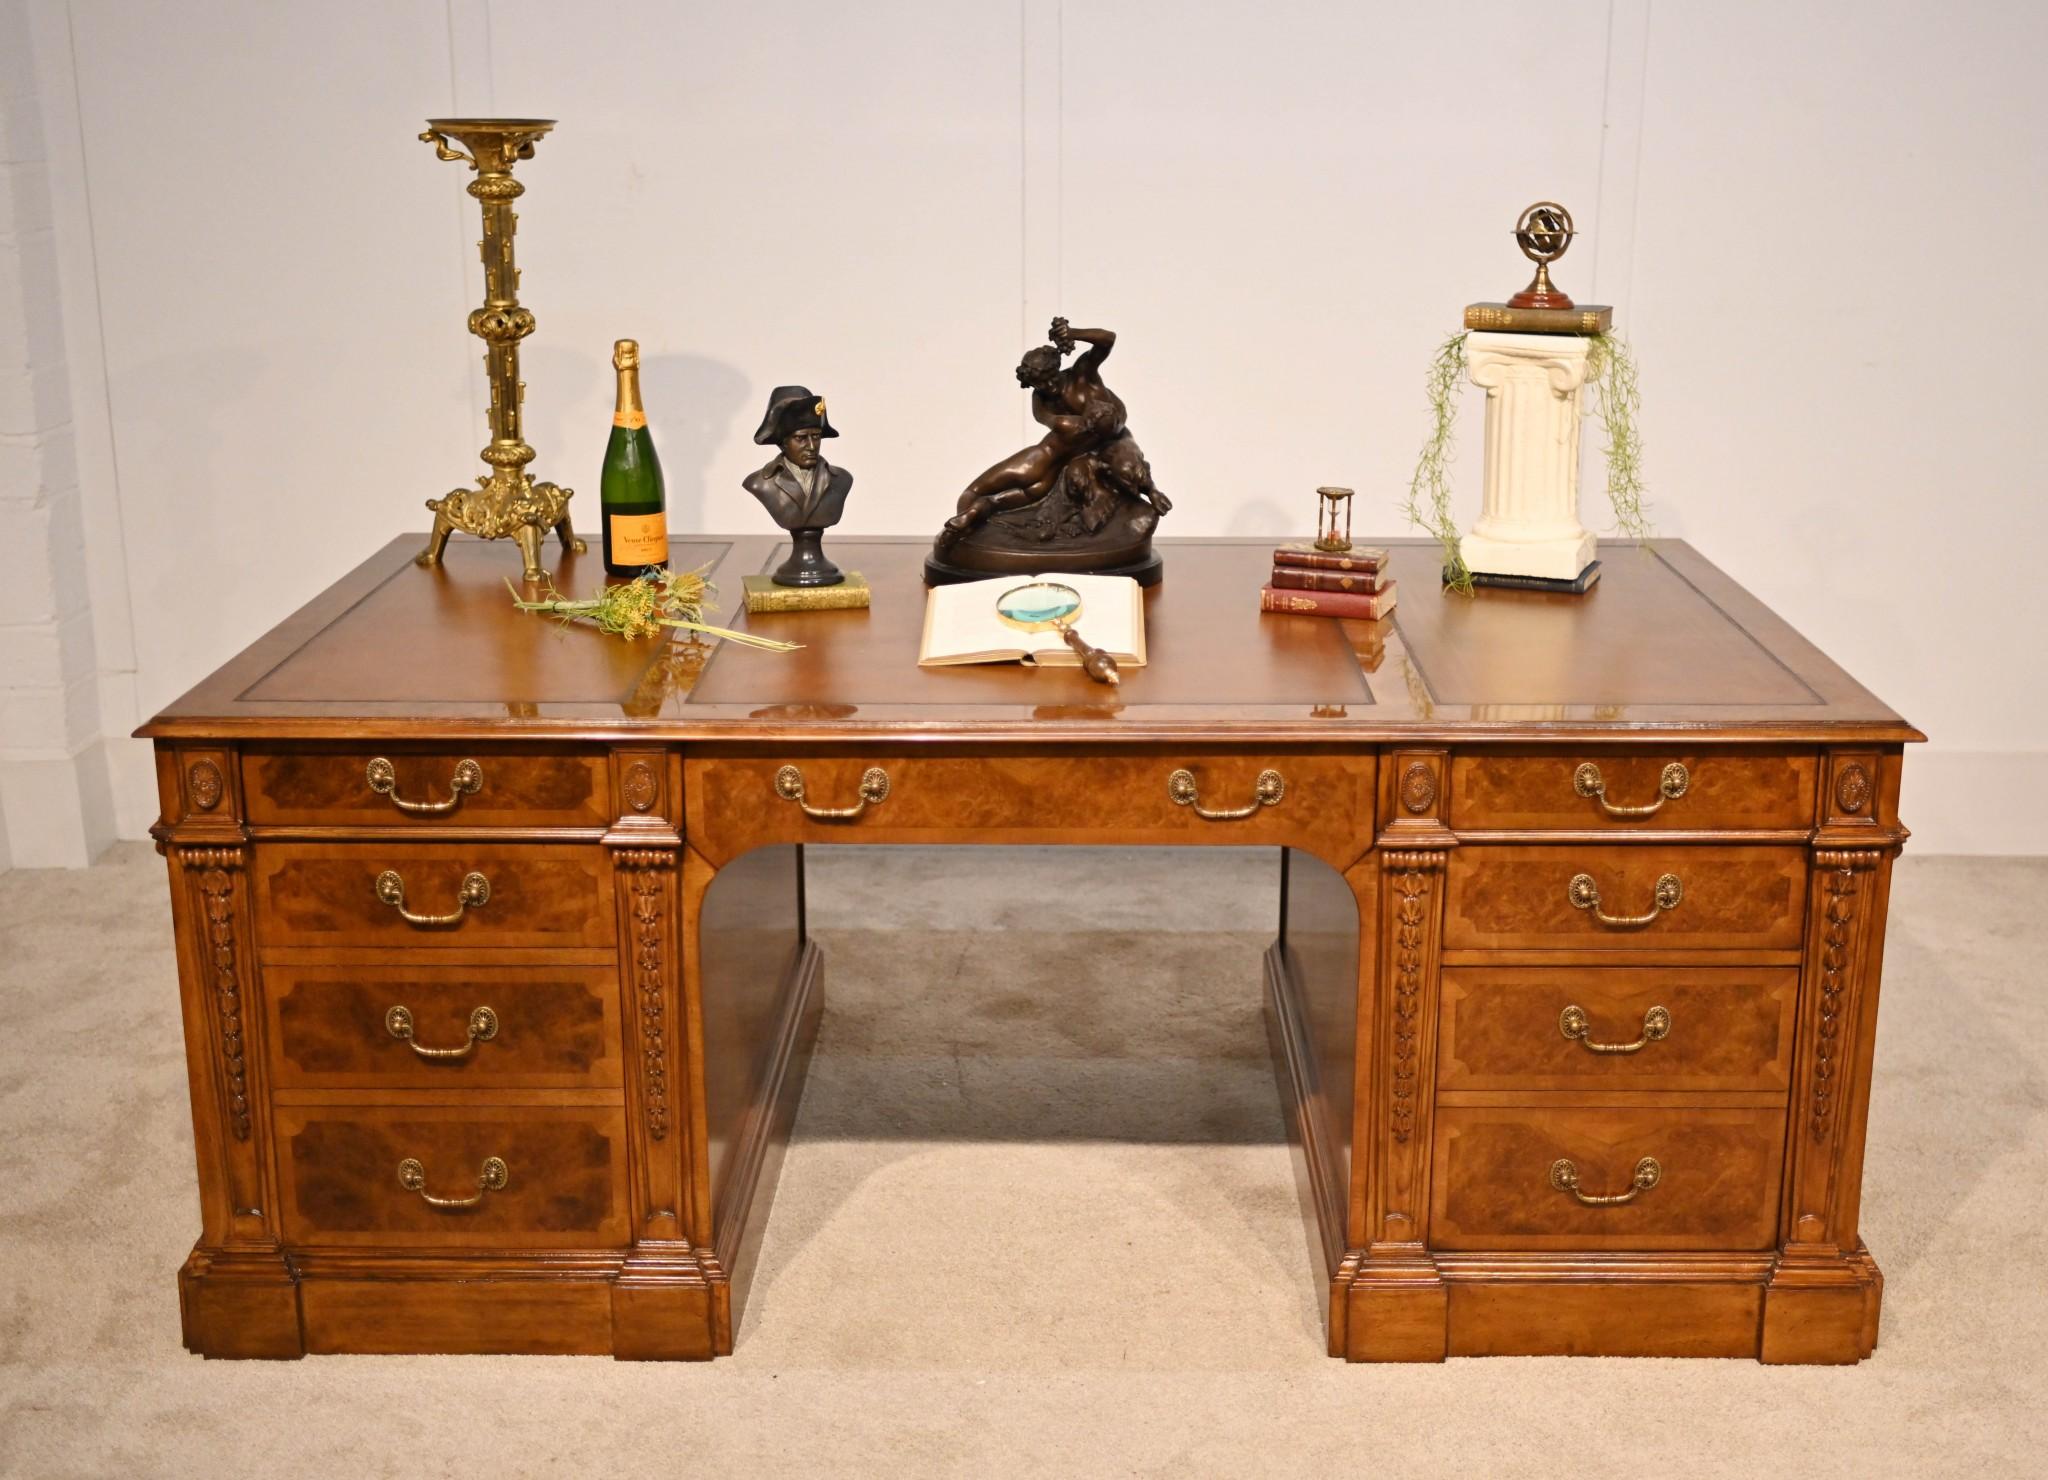 Fantastic large partners desk in the Regency manner
True partners desk with drawers and cupboards on both sides
Features solid oak drawer linings and brass drop handle
Good size so perfect for a home office set up
Large top features a leather